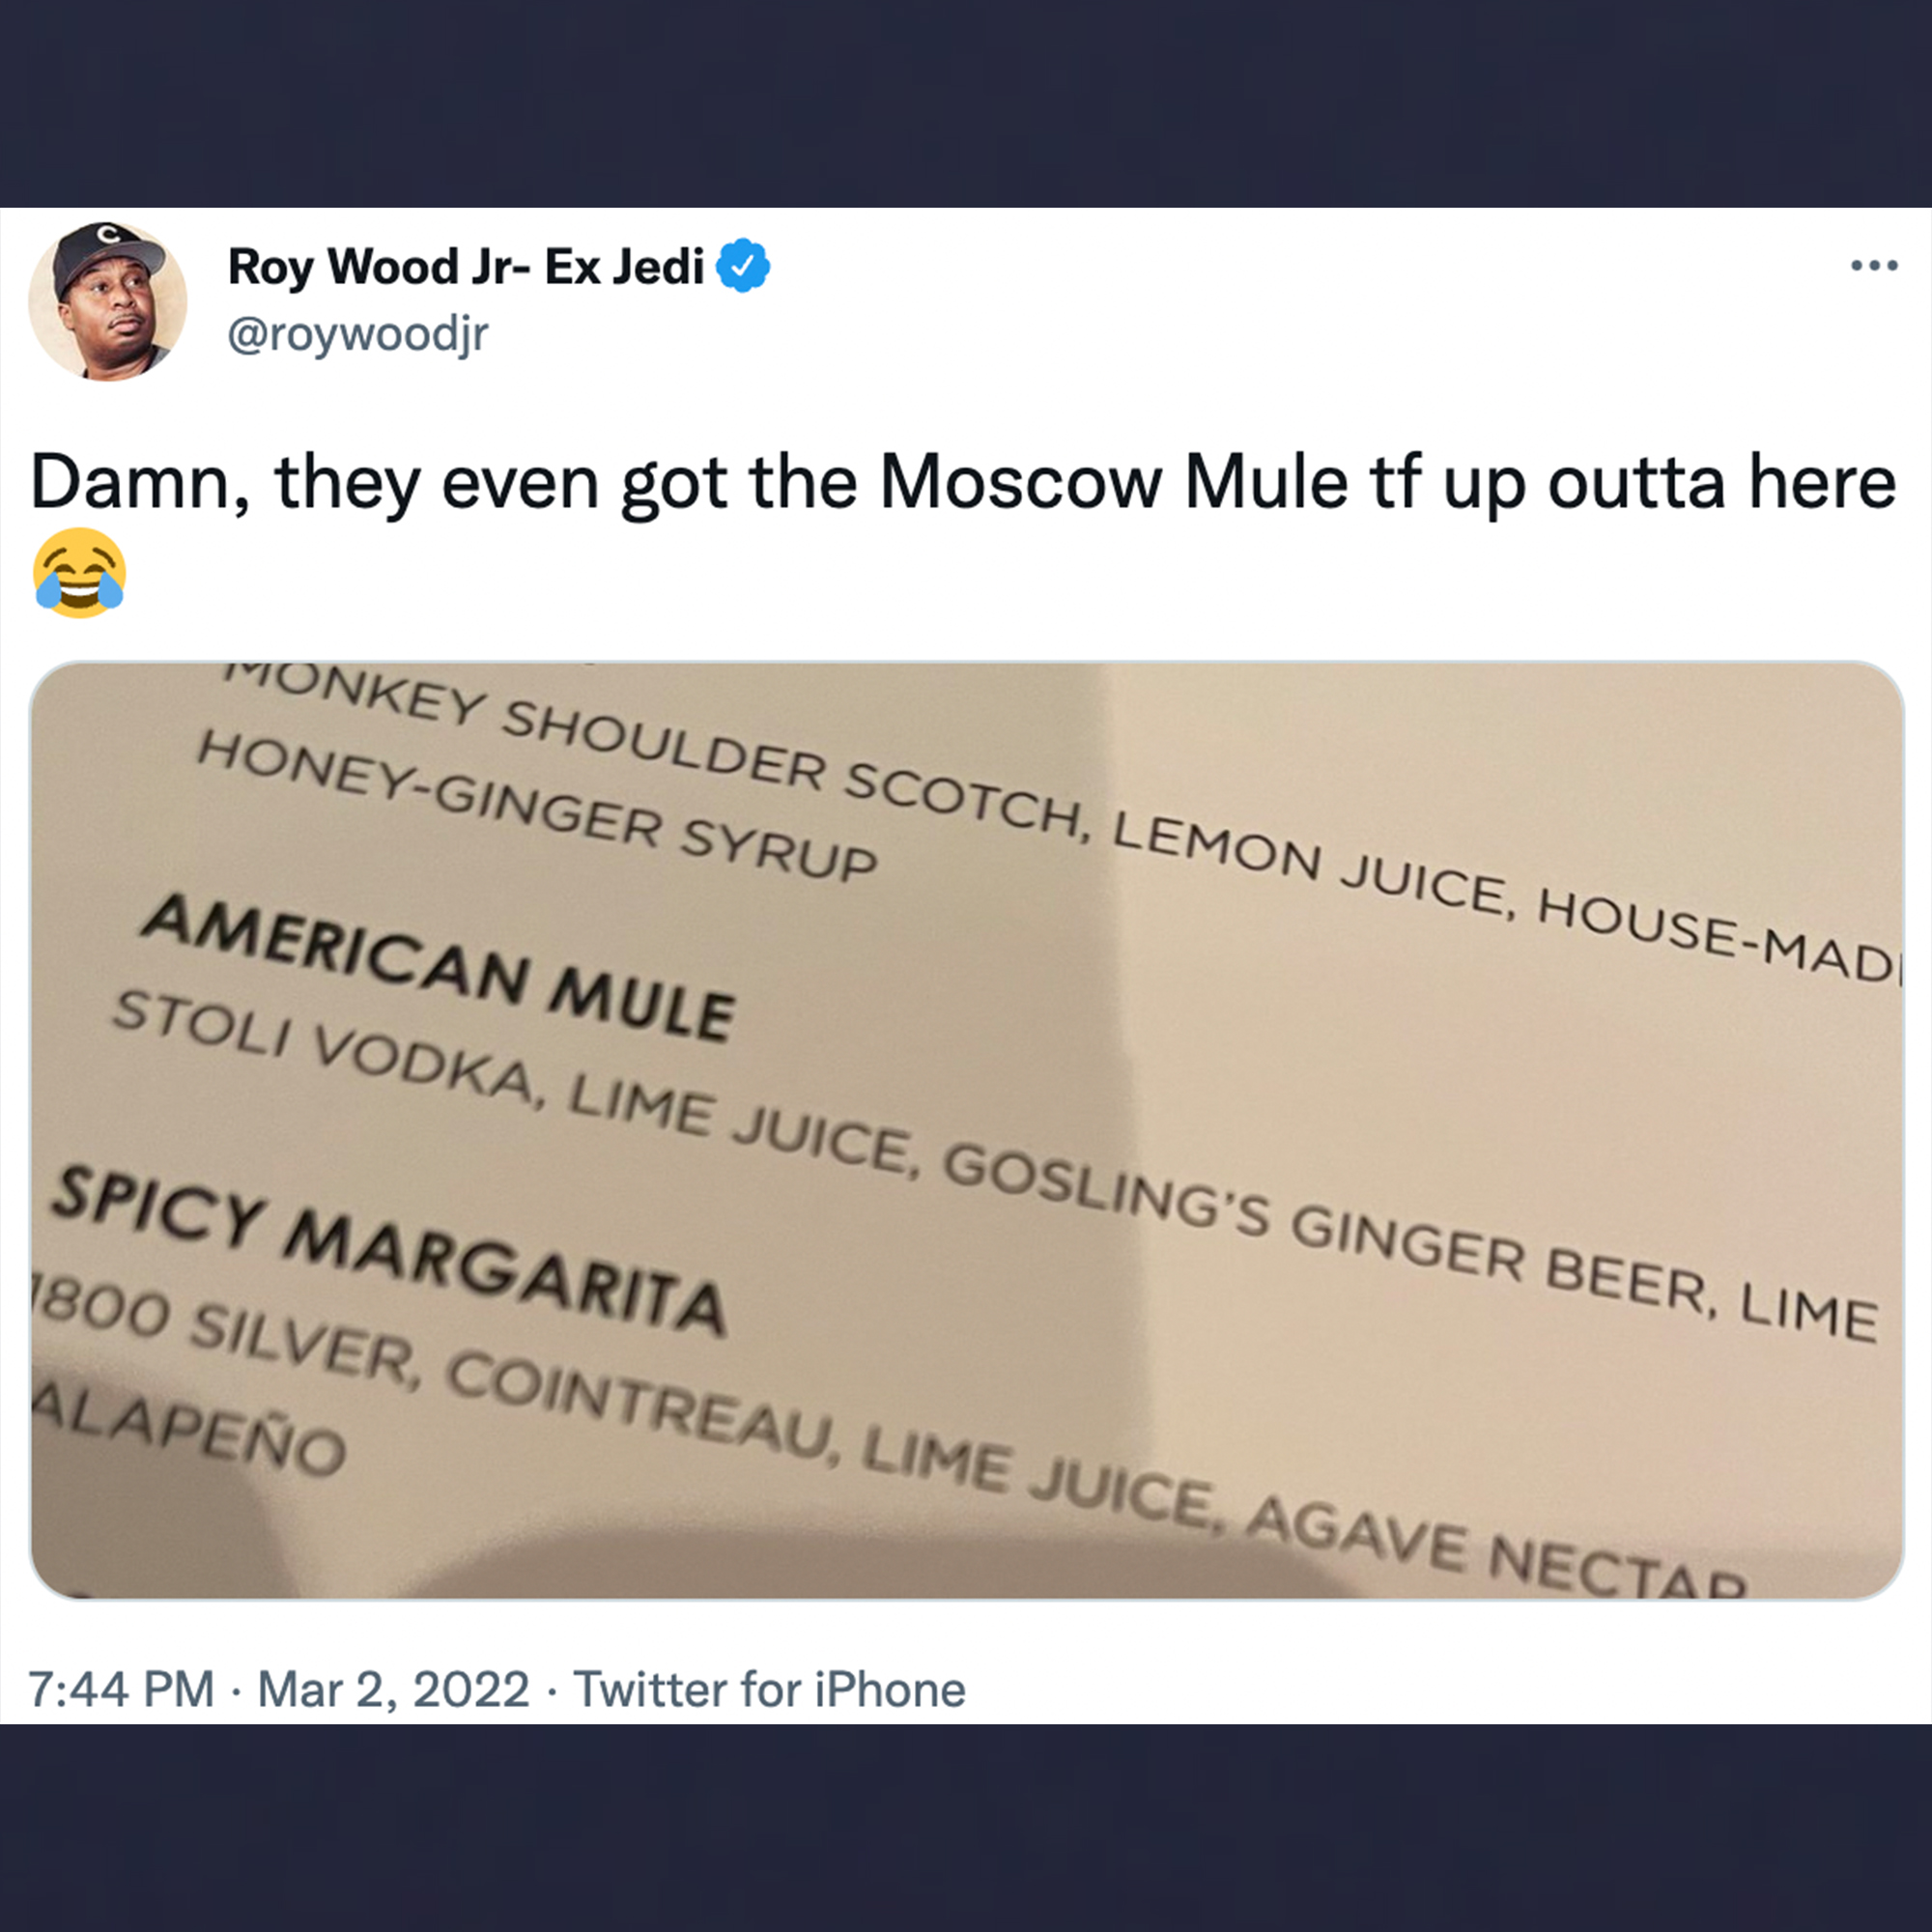 funny tweets - material - Roy Wood JrEx Jedi Damn, they even got the Moscow Mule tf up outta here Monkey Shoulder Scotch, Lemon Juice, HouseMad HoneyGinger Syrup American Mule Stoli Vodka, Lime Juice, Gosling'S Ginger Beer, Lime Spicy Margarita 1800 Silve